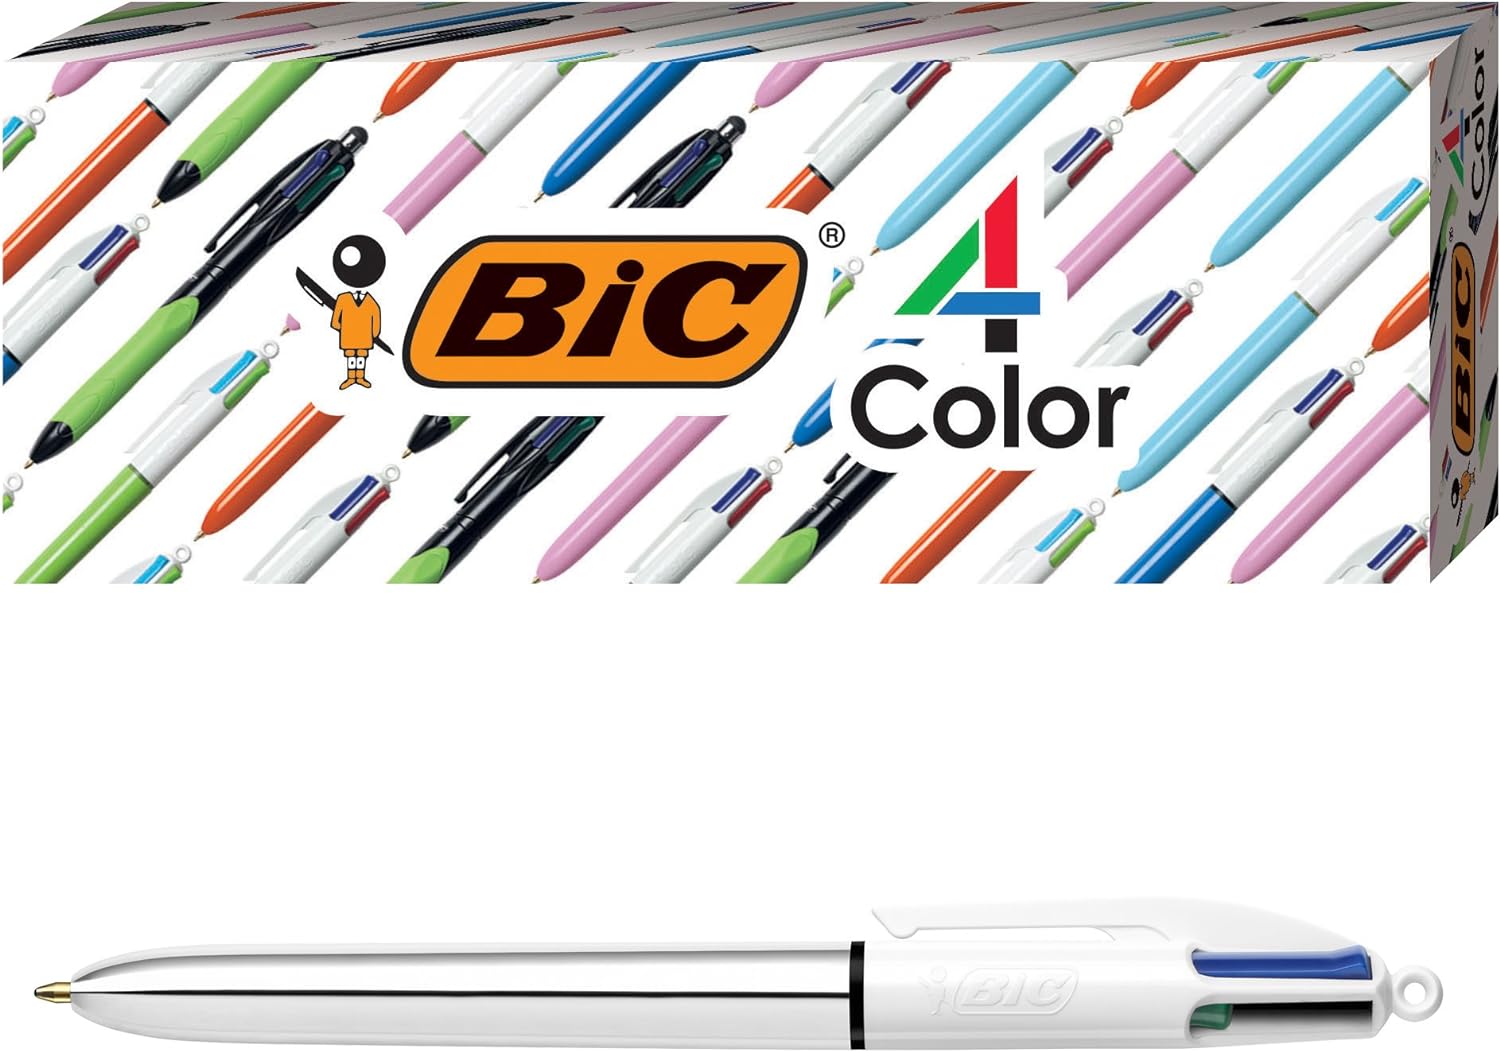 BIC 4-Color Shine Ballpoint Pen, Silver Barrel, Medium Point (1.0mm), Assorted Inks, 3-Count